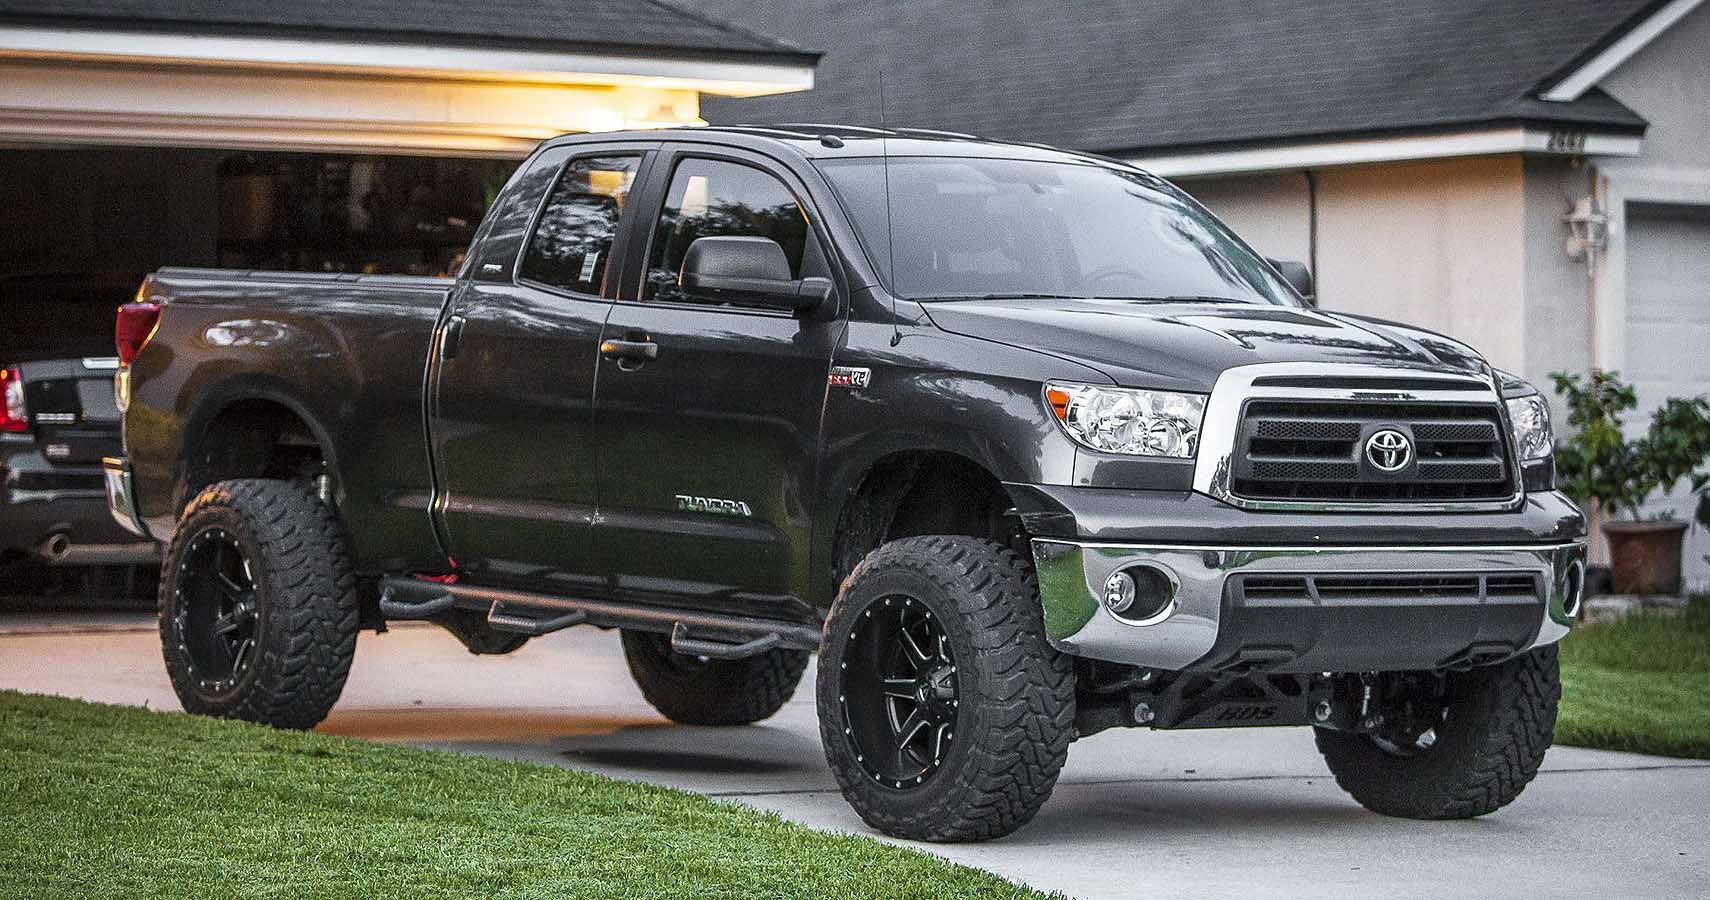 The Best Years Of Toyota Tundra Are 2009 and 2013